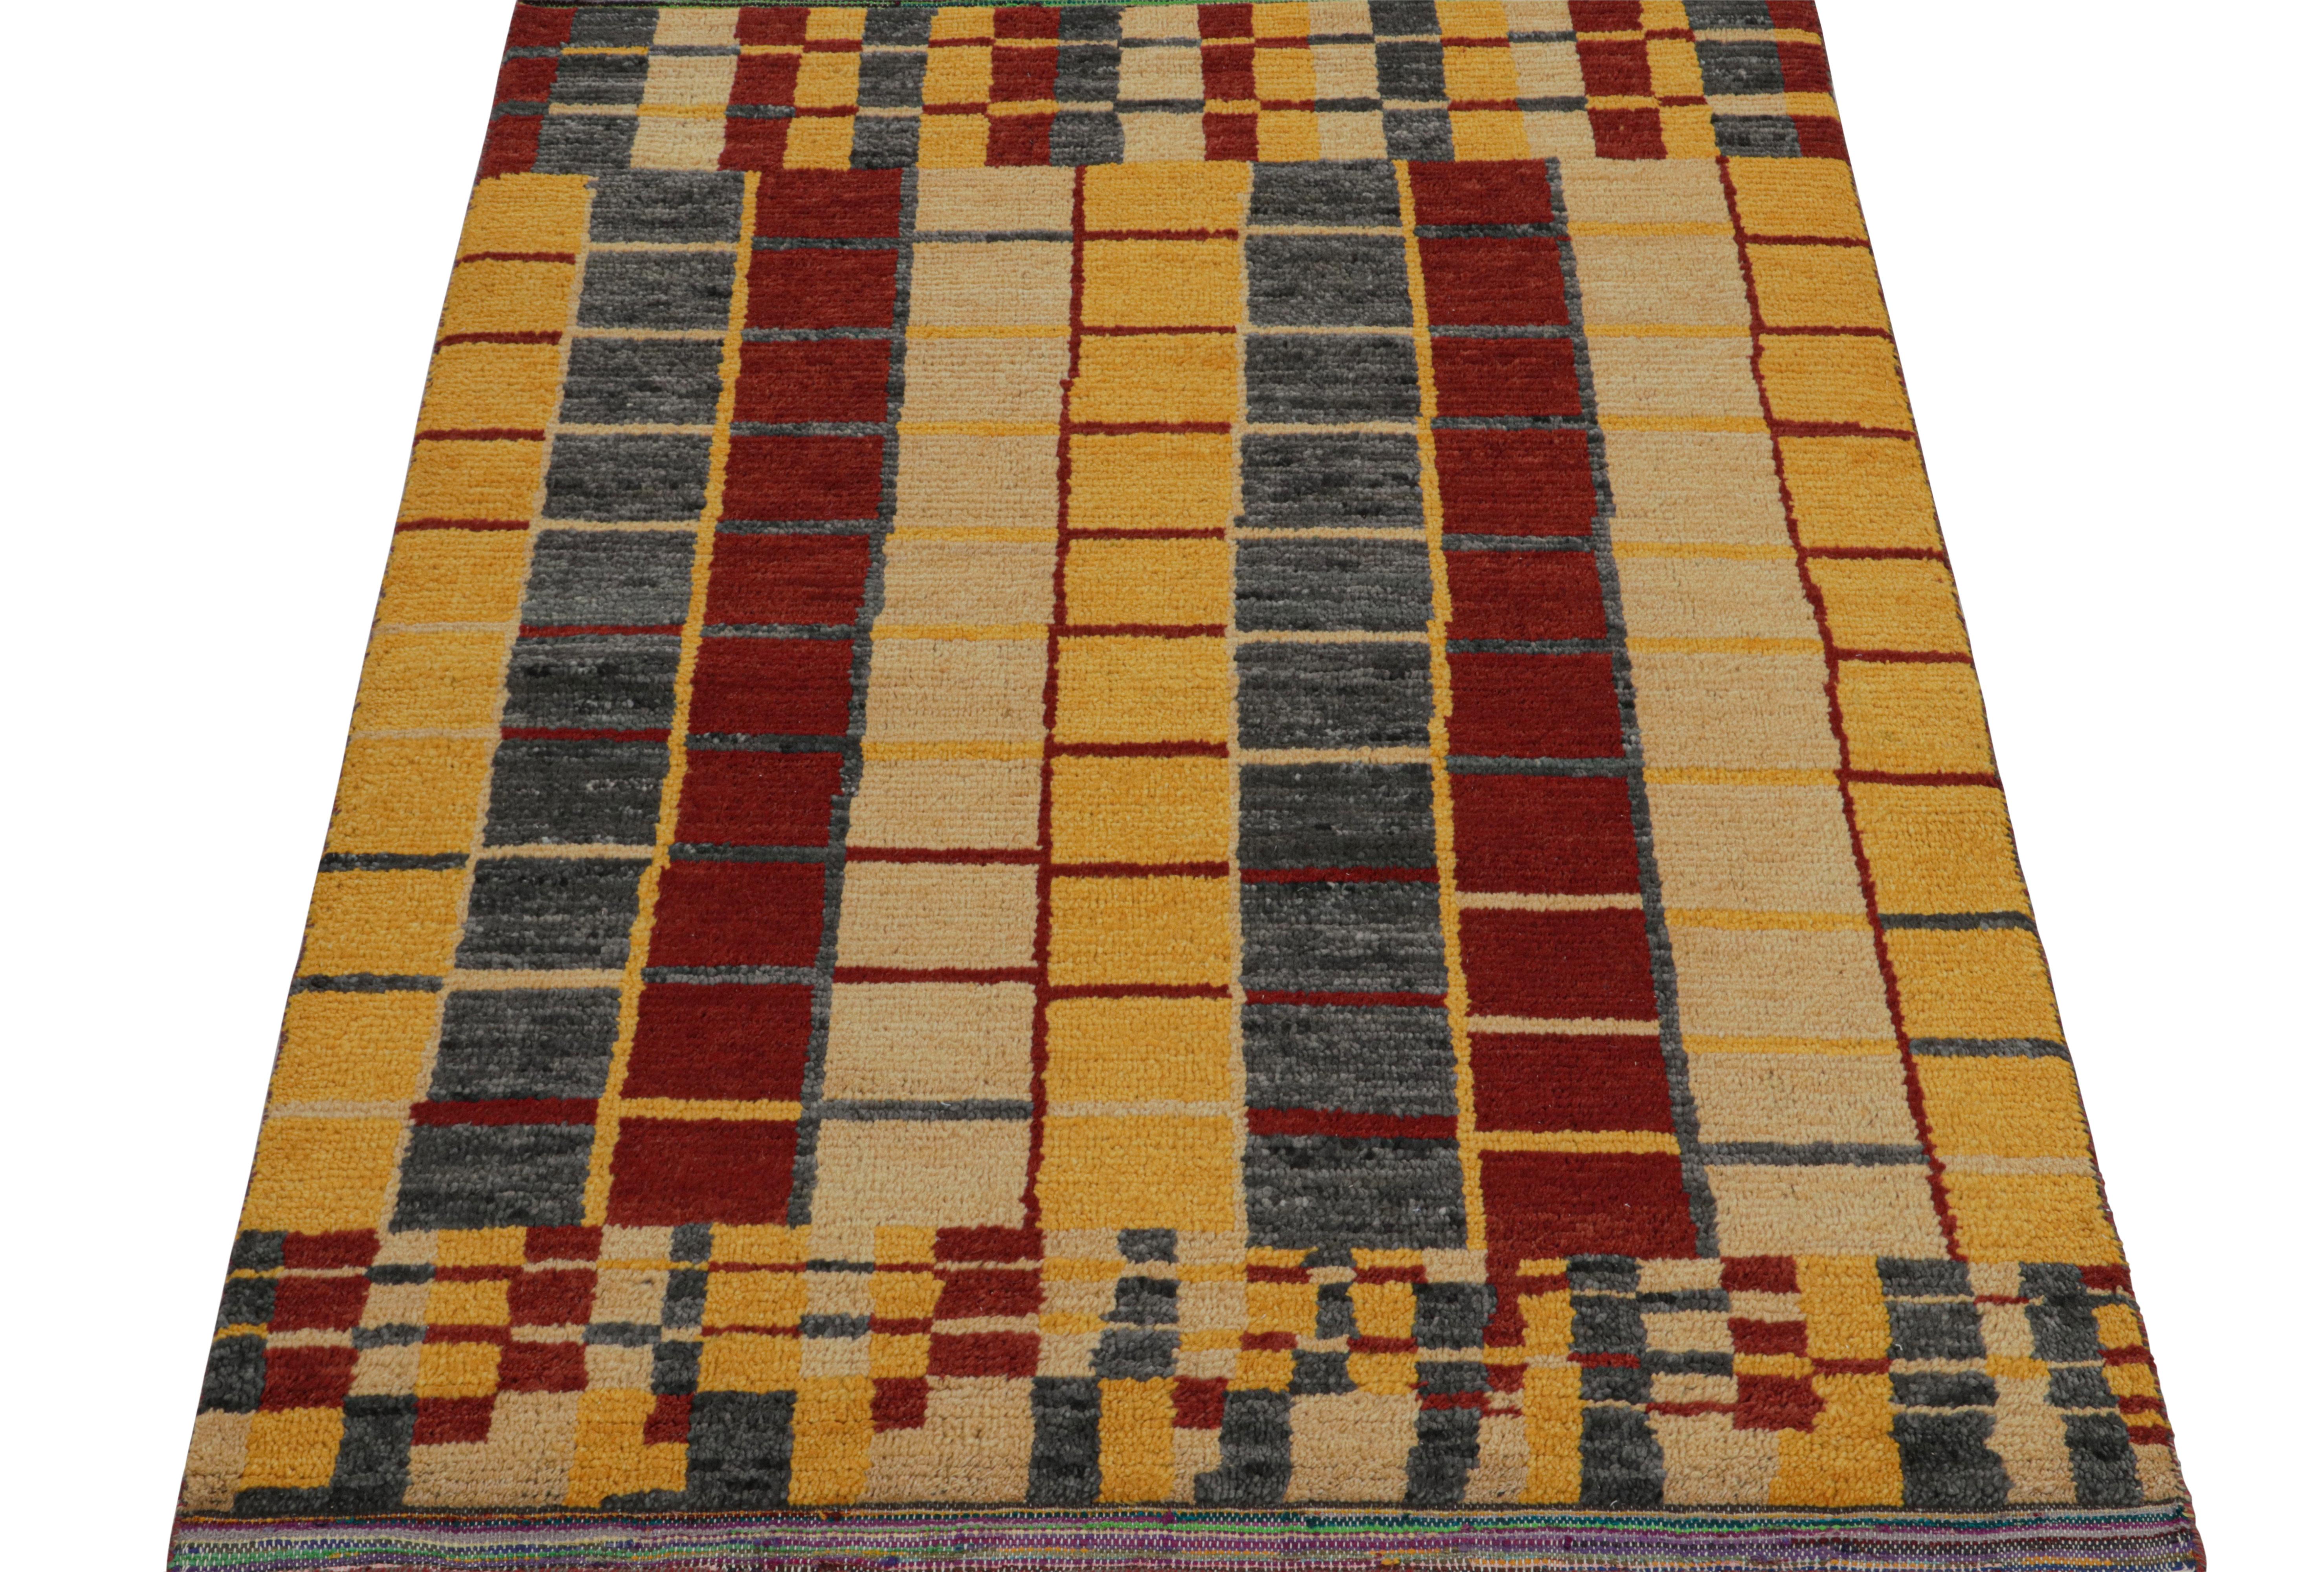 Indian Rug & Kilim’s Moroccan Style Rug in Gold, Gray and Red Tribal Geometric Pattern For Sale